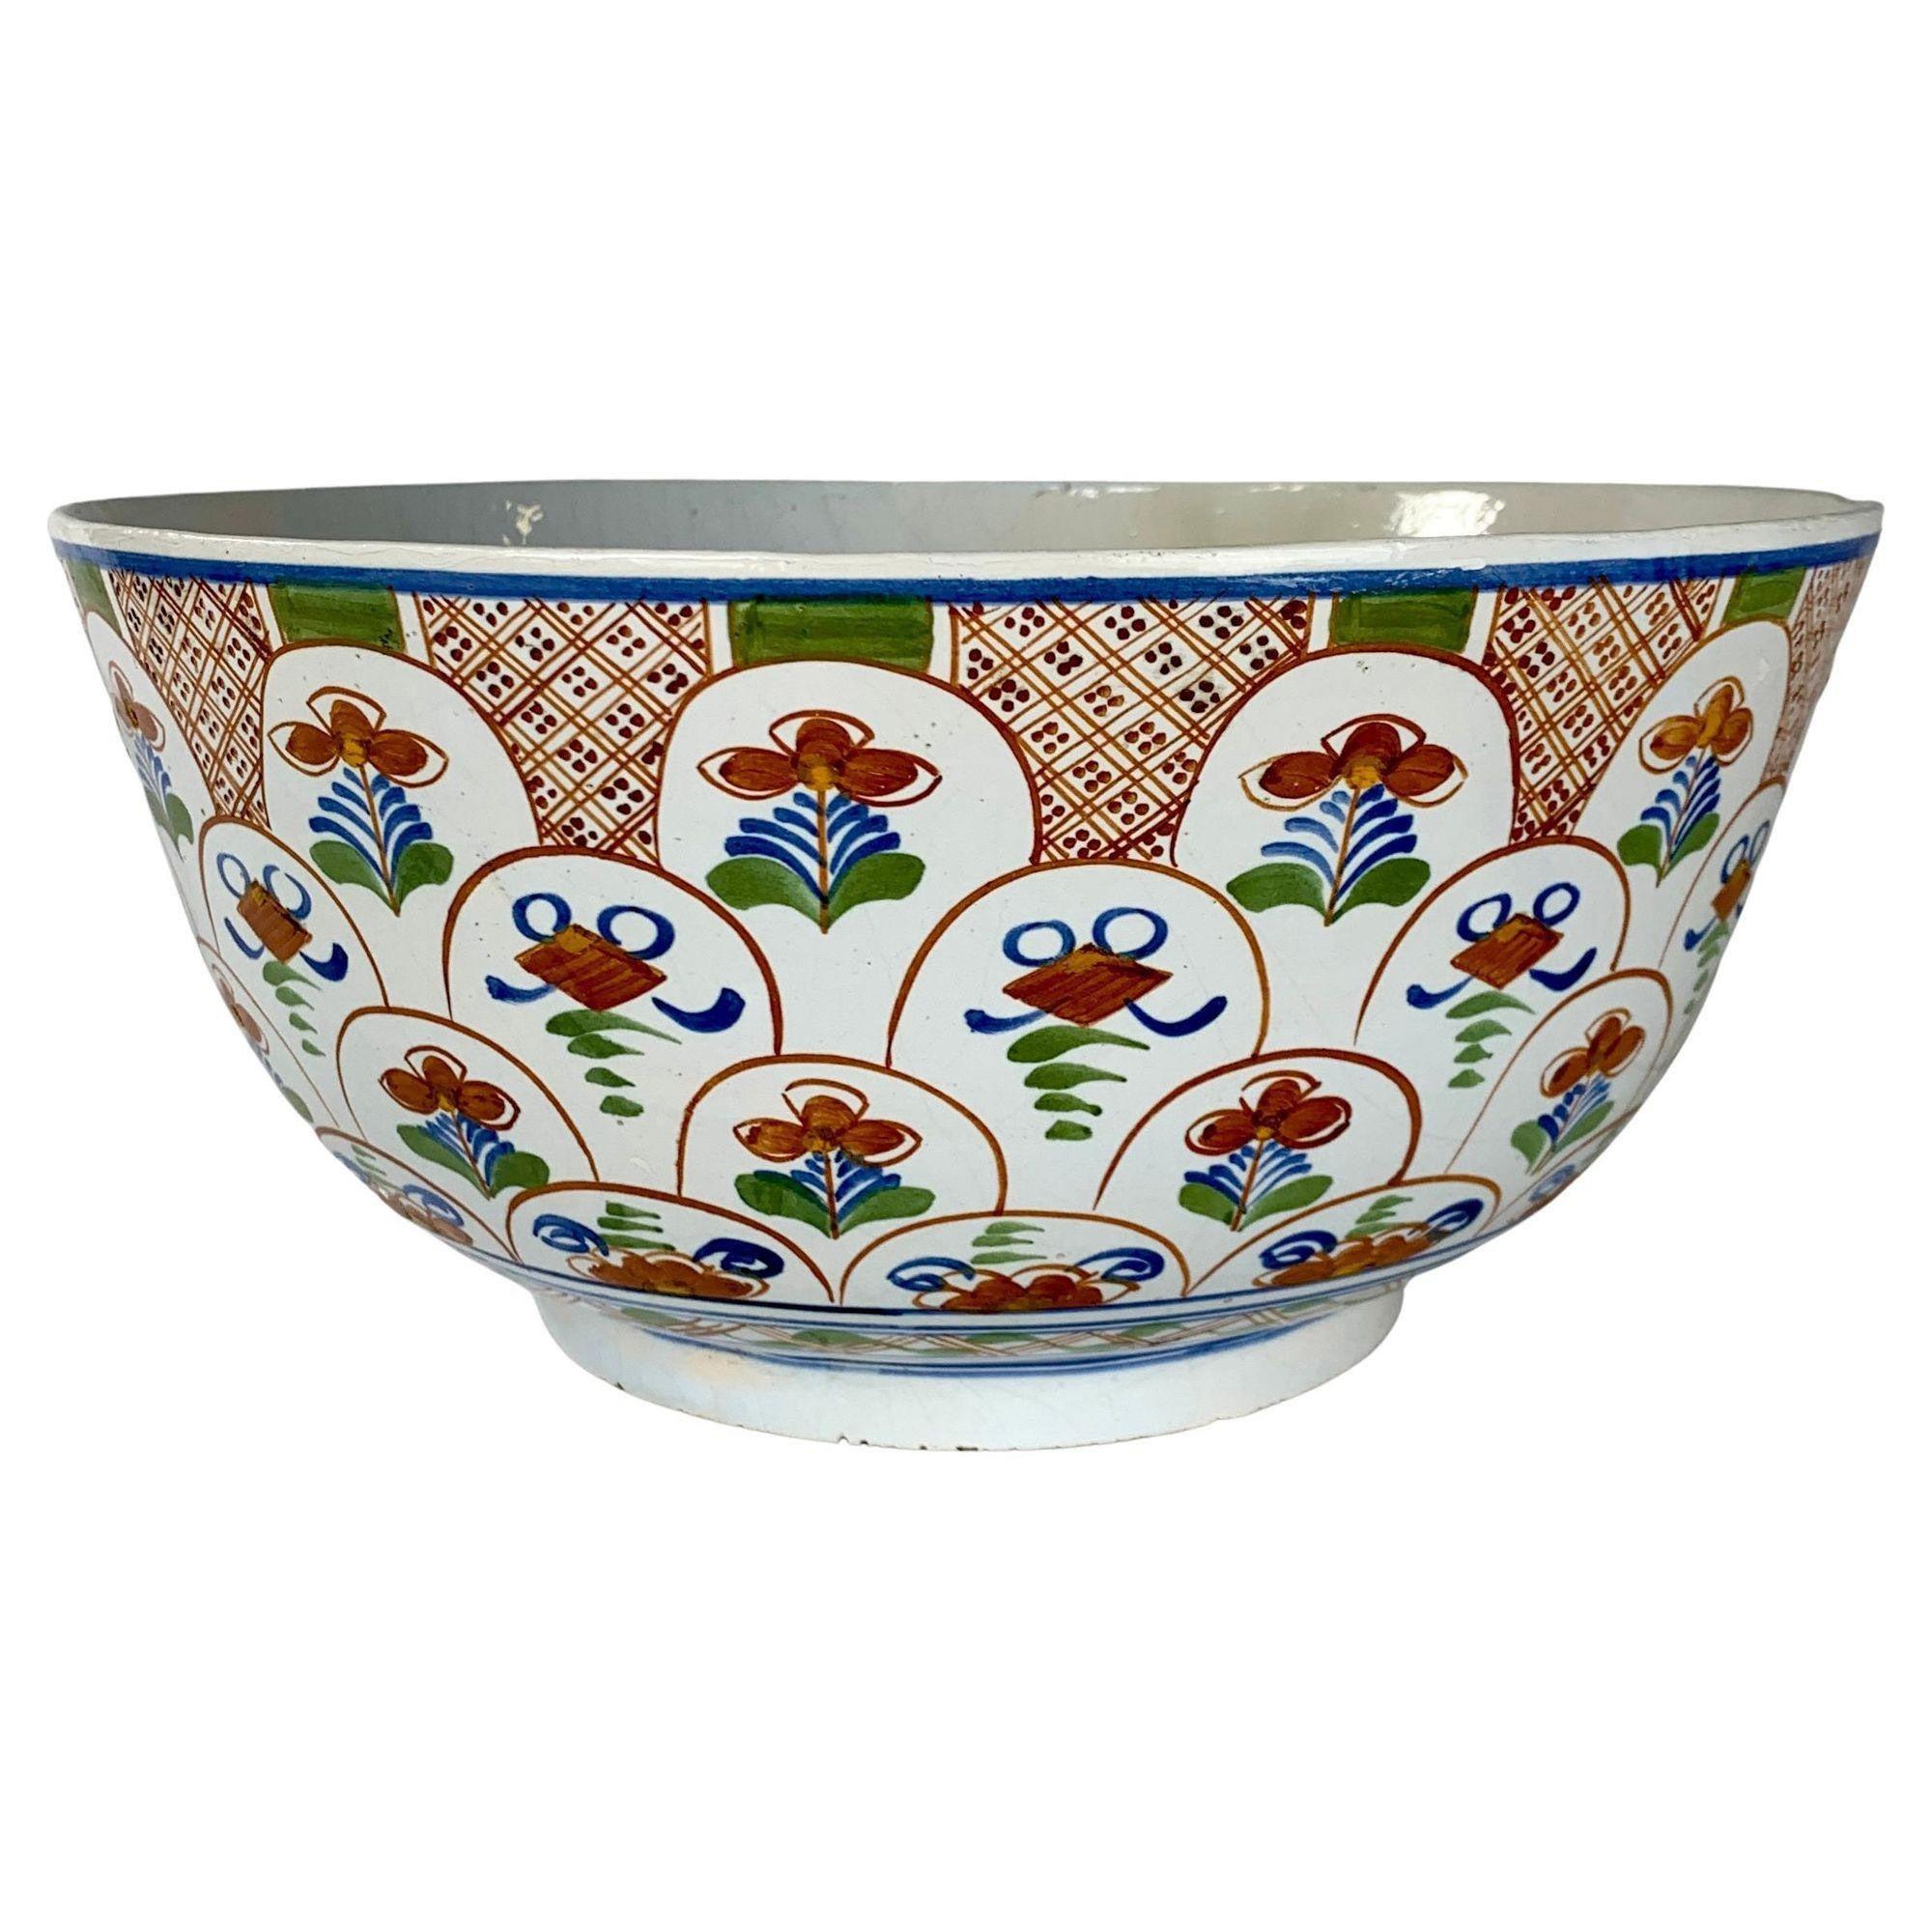 This group of a large Delft punch bowl with four corresponding Delft chargers was made in the Netherlands in the 18th century, circa 1780.
Each piece is hand painted with iron red tulips, some budding, some in bloom, and some as bulbs. The tulips